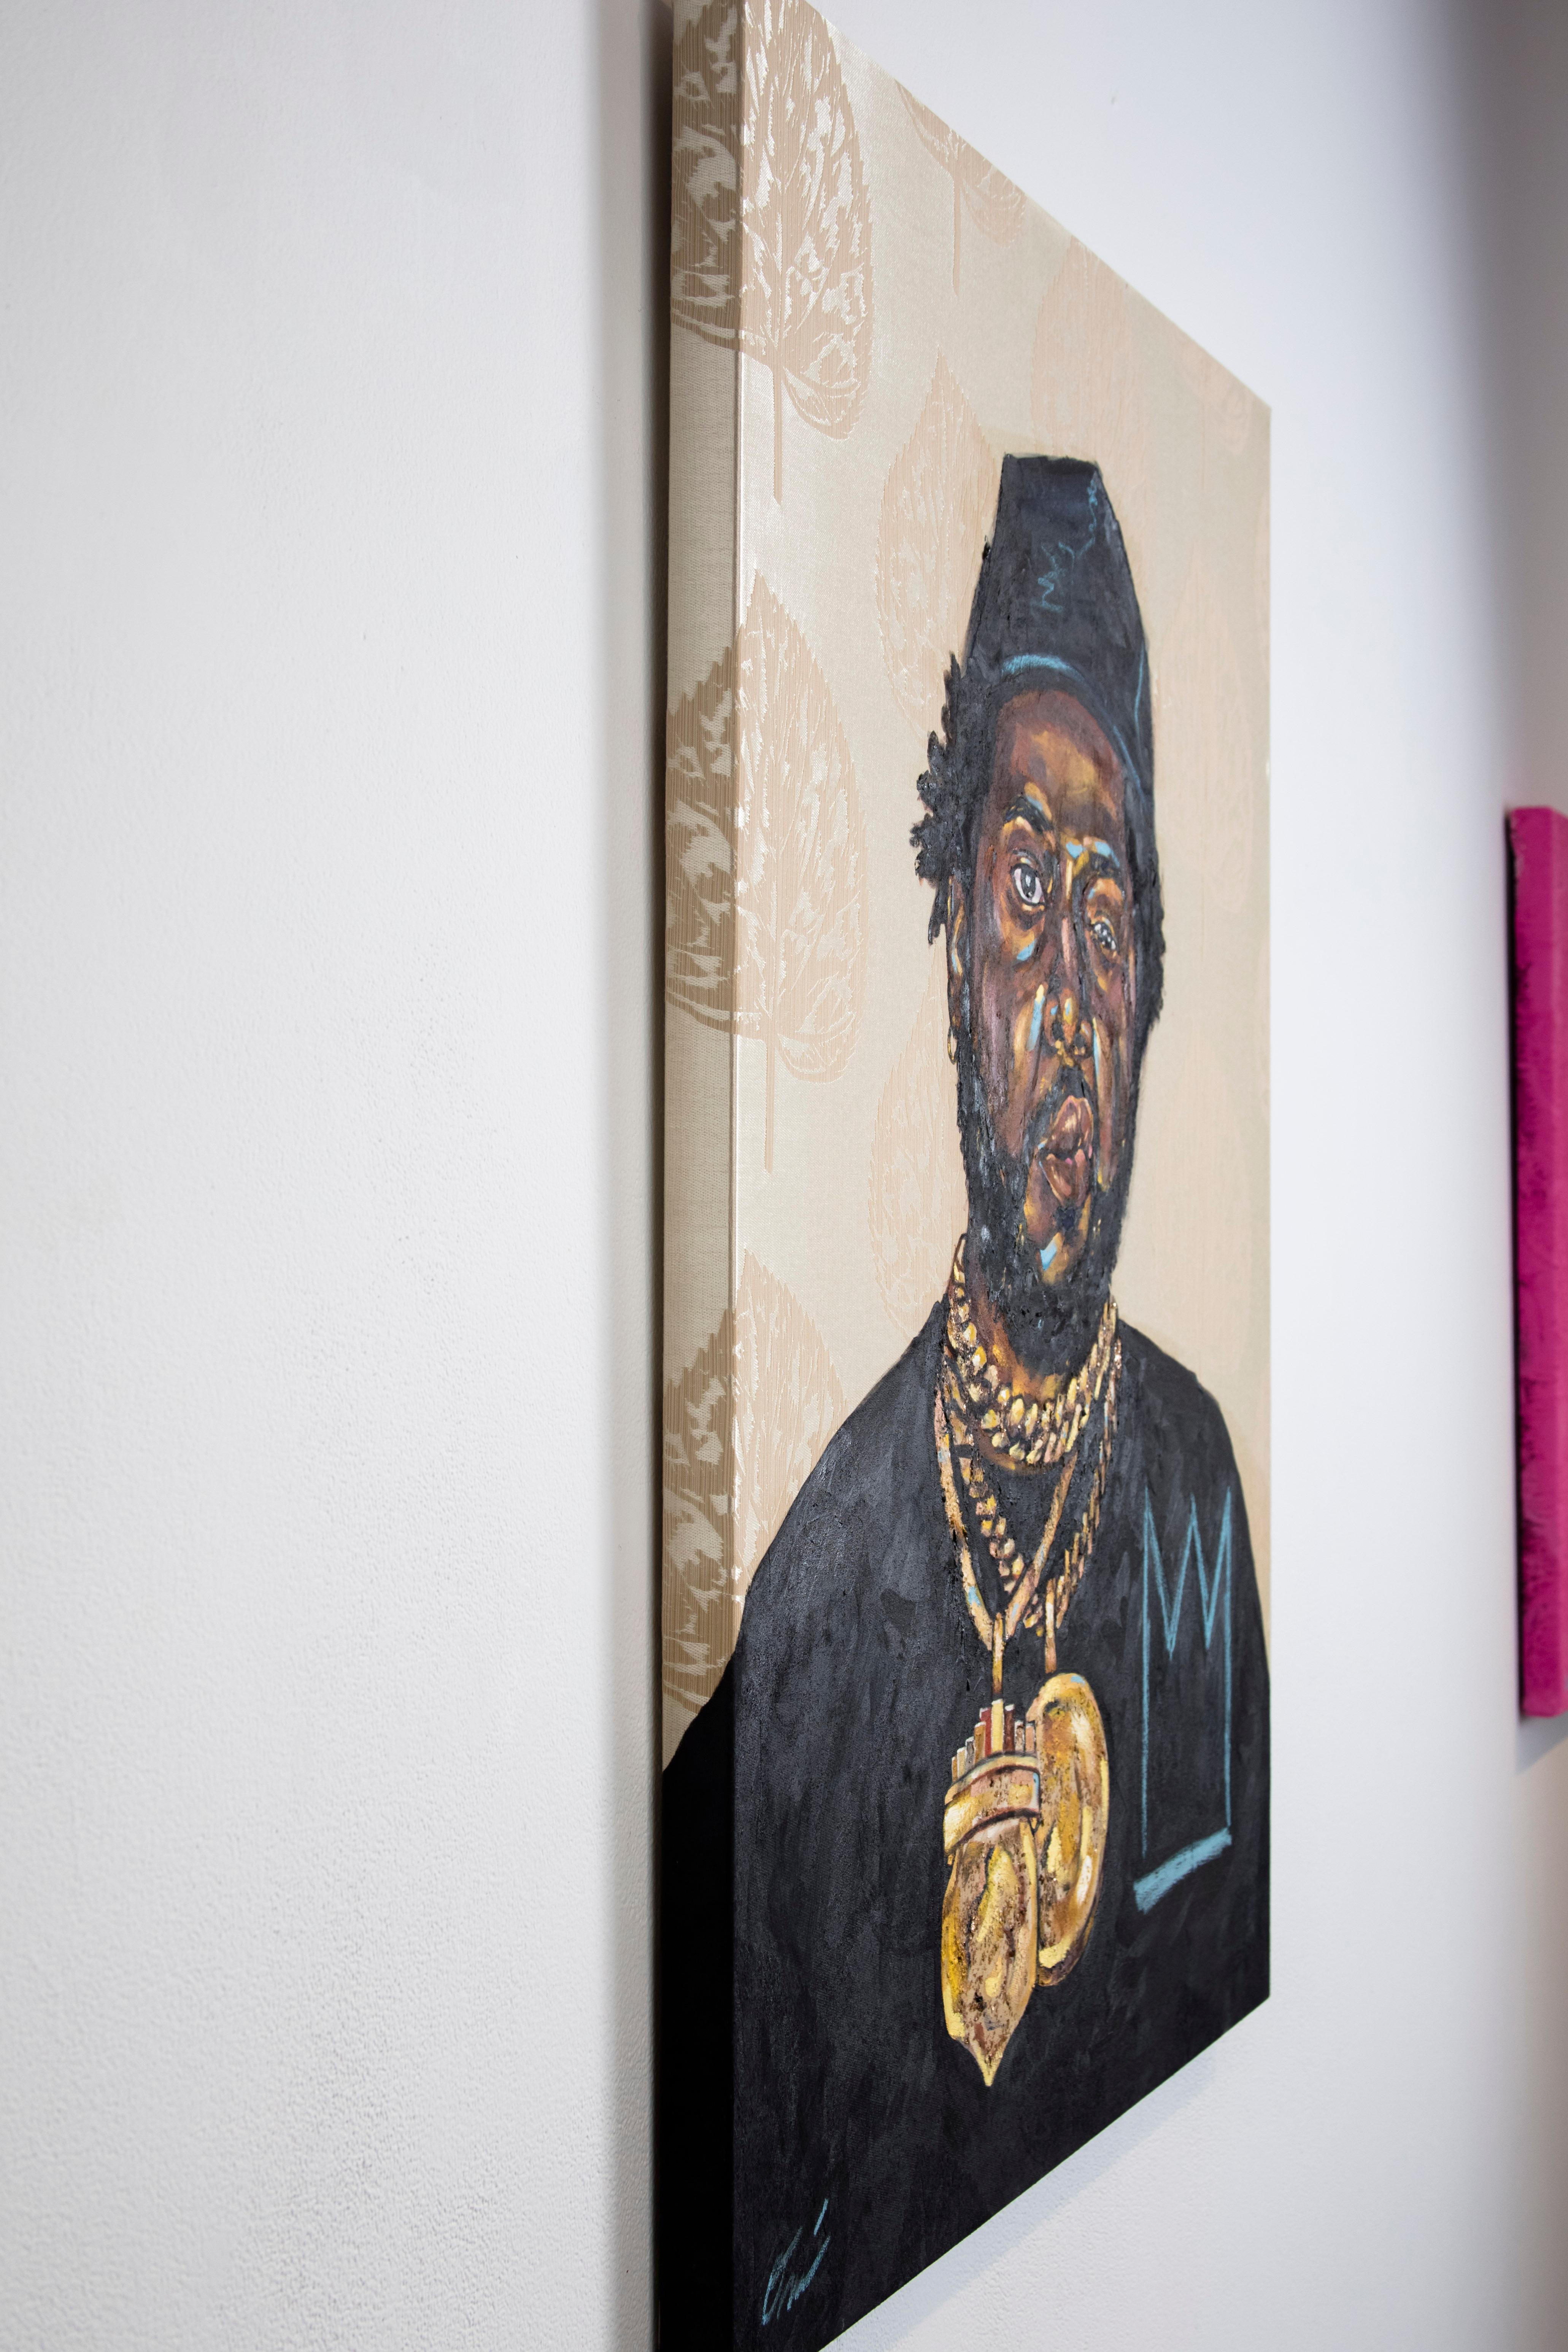 LA MAQUINA - Portrait Painting of Conway the Machine, Rapper, Gold, Black - Beige Figurative Painting by Omari Booker